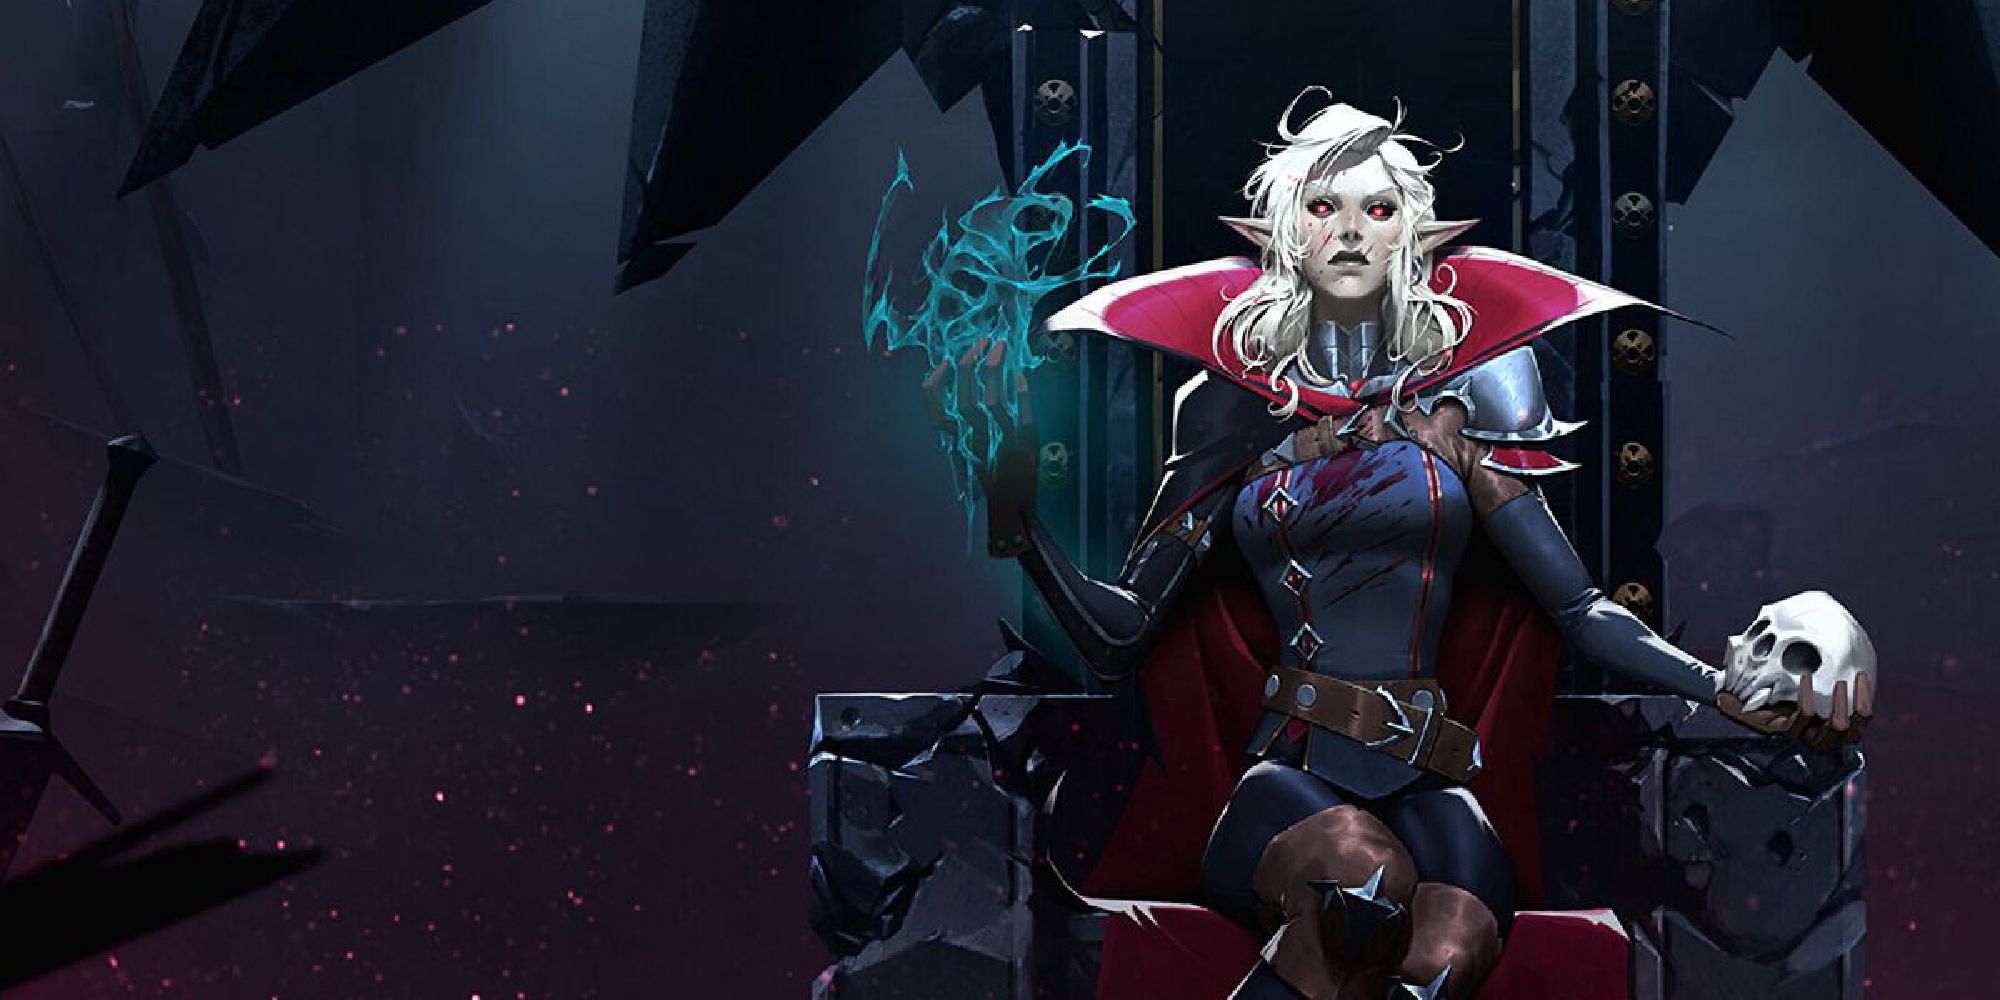 Promotional art opf V Rising featuring a white-haired woman on a throne, a spell in one hand, a skull in the other.